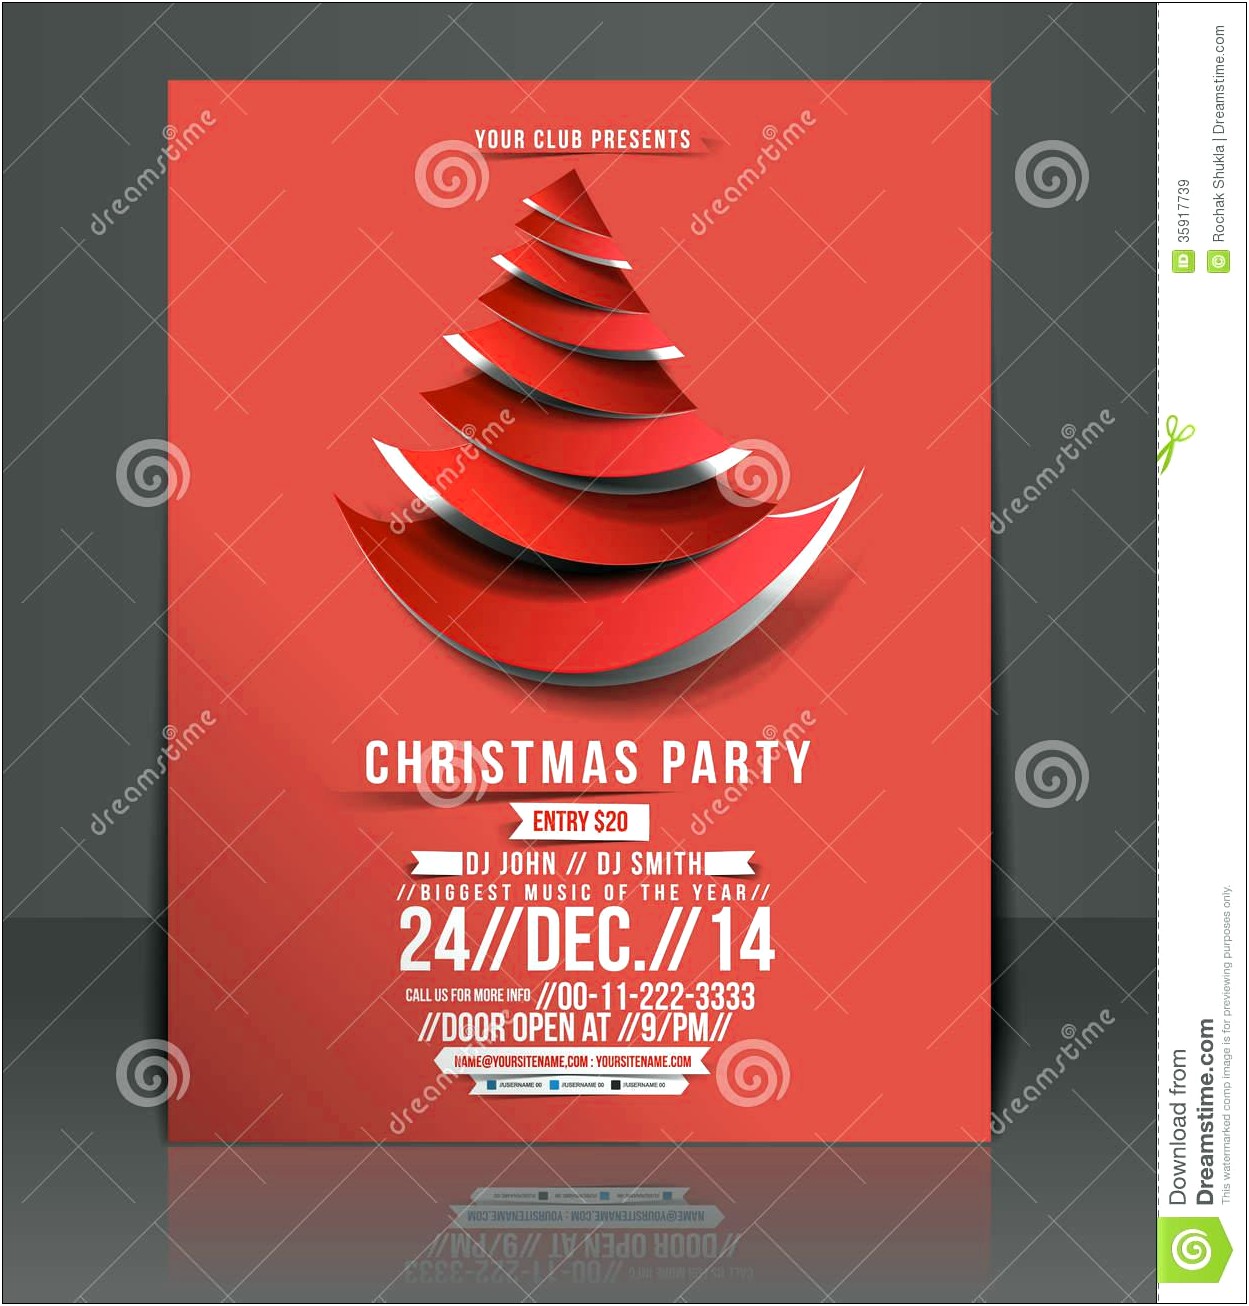 Free Christmas Party Templates For Word